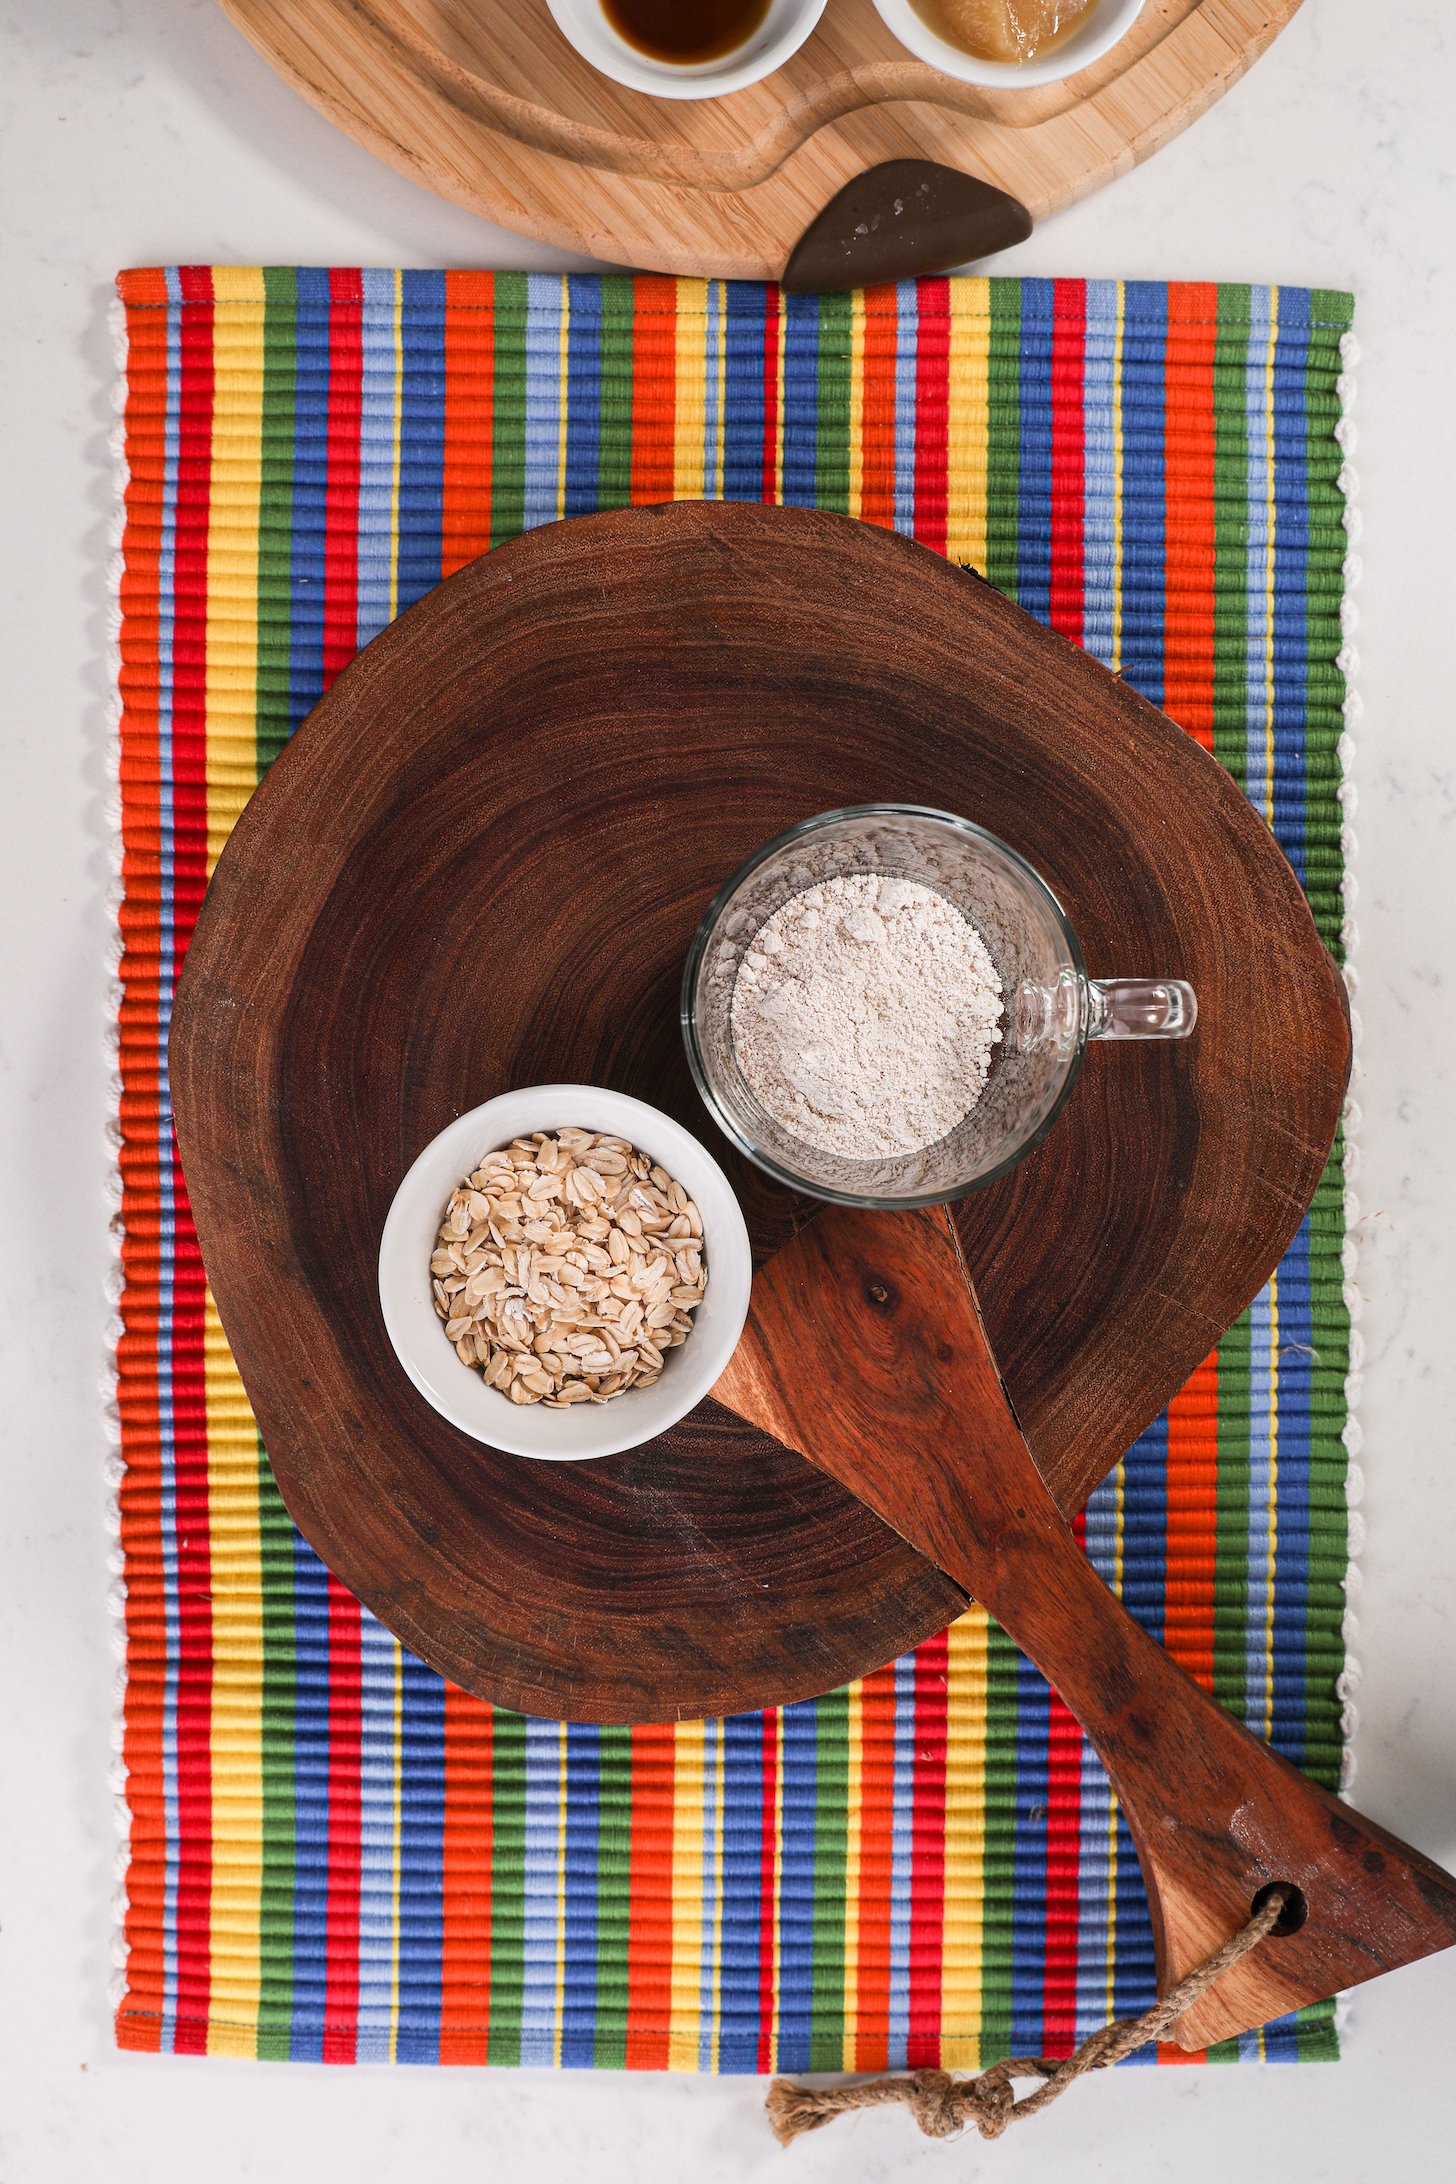 A bowl of rolled oats and a mug of flour on a wooden board that's placed on a colourful place mat.